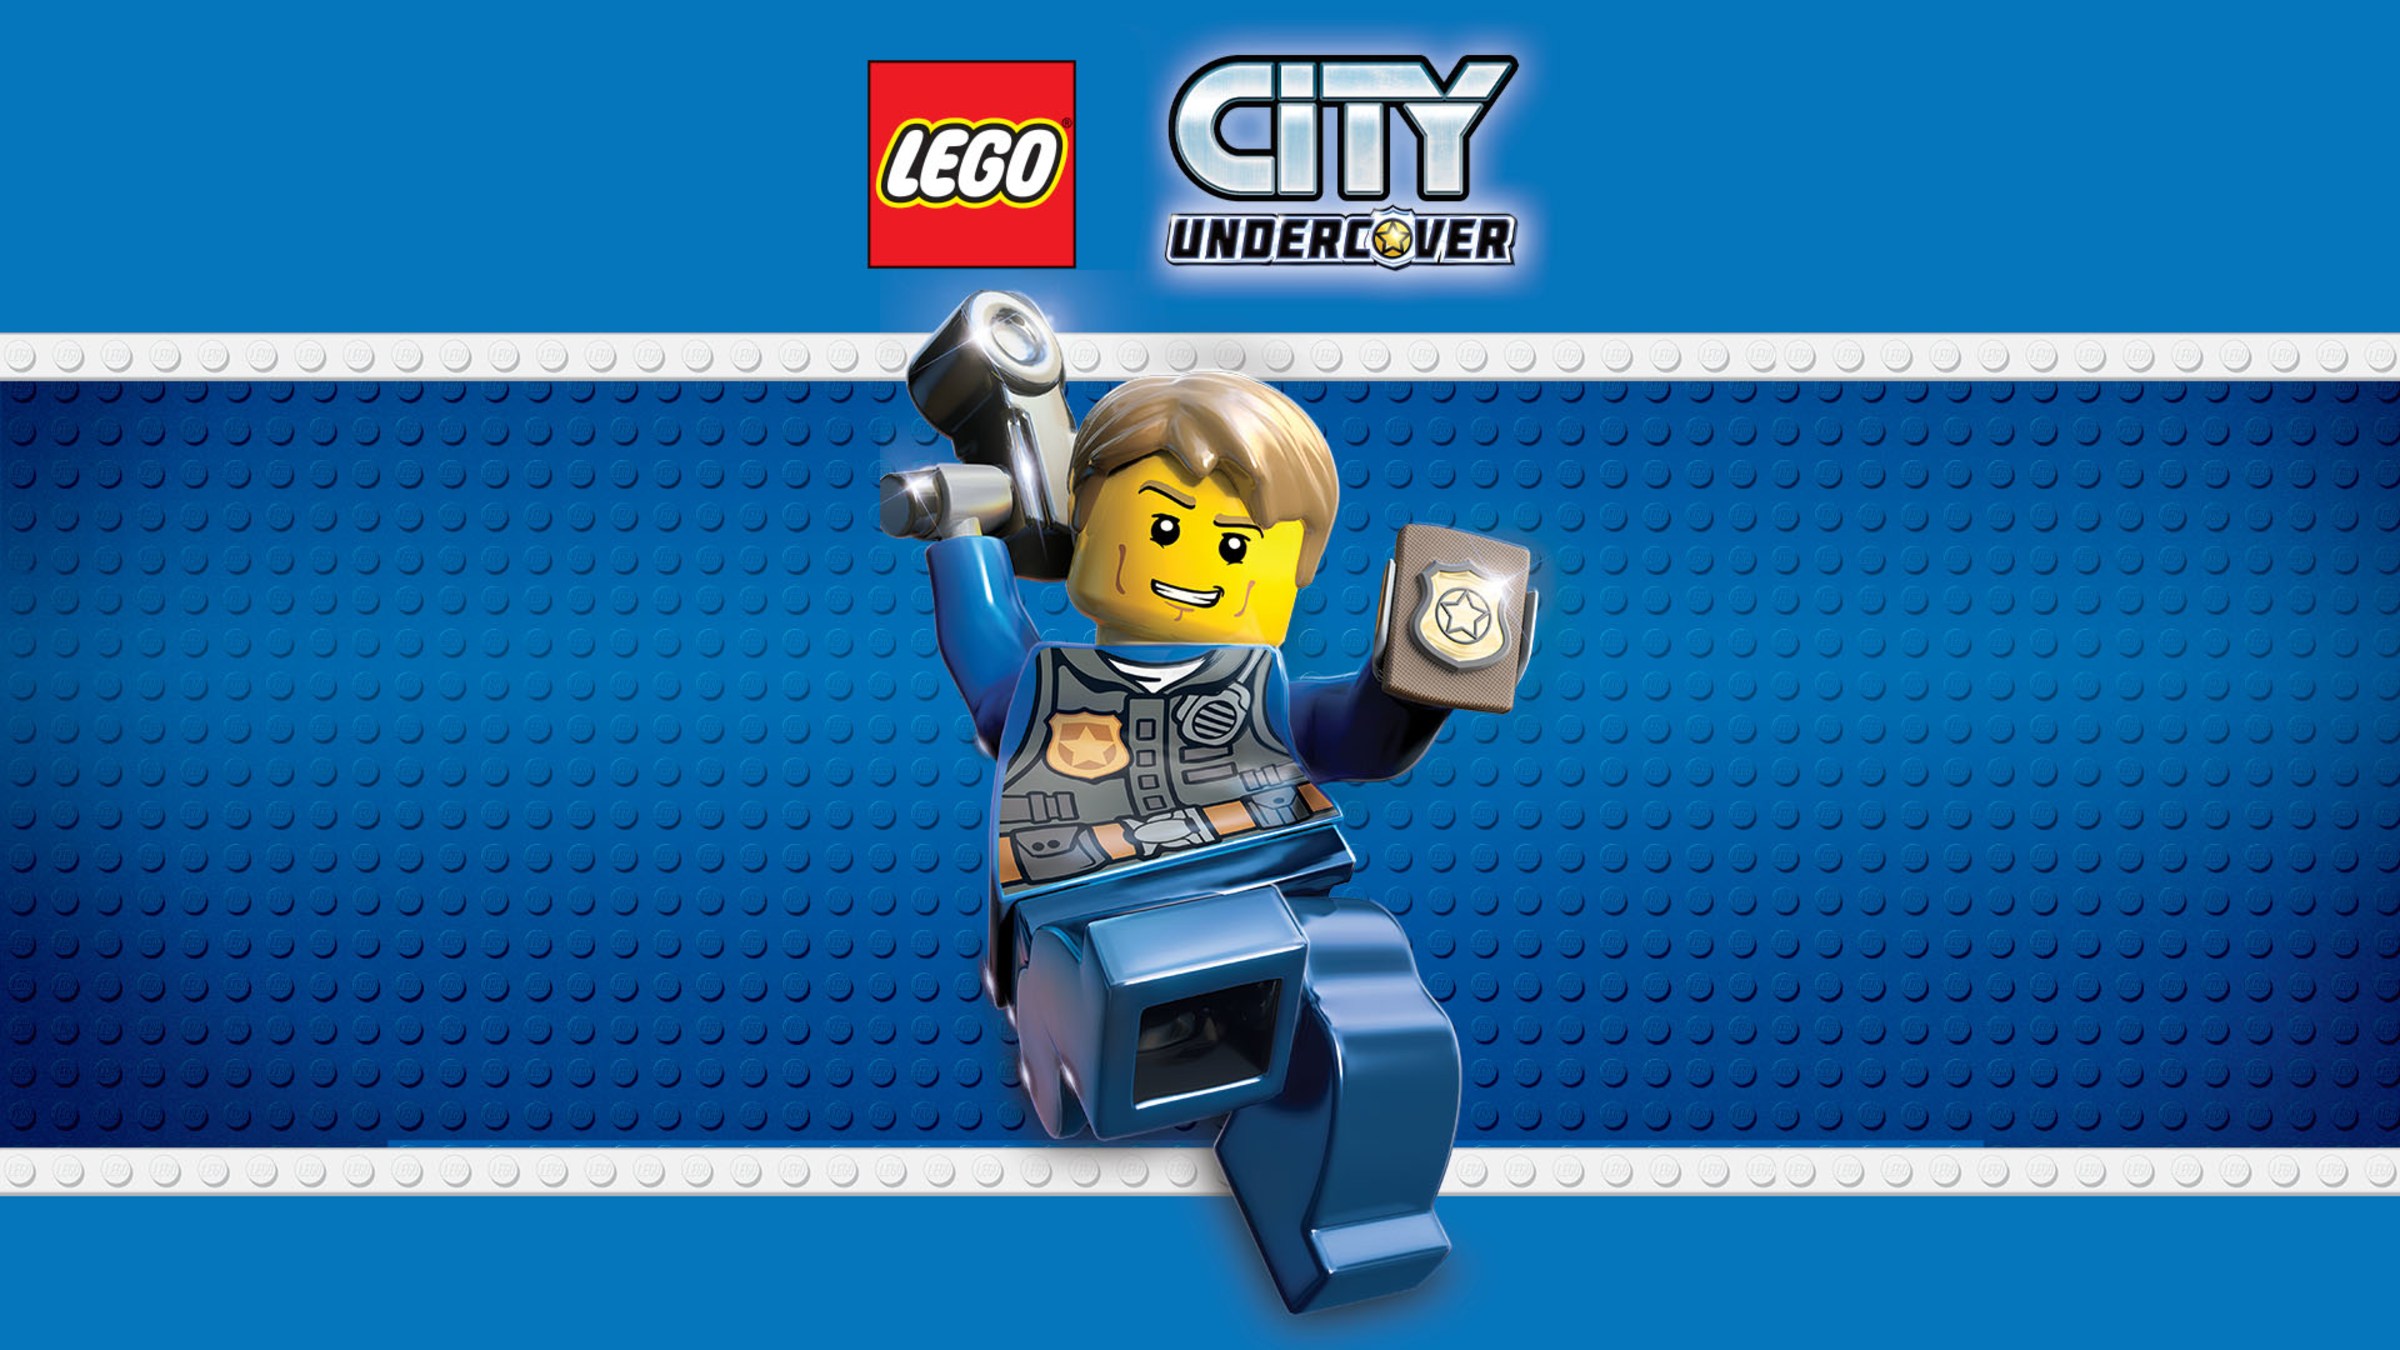 malm Ristede Tillid LEGO® CITY Undercover for Nintendo Switch - Nintendo Official Site